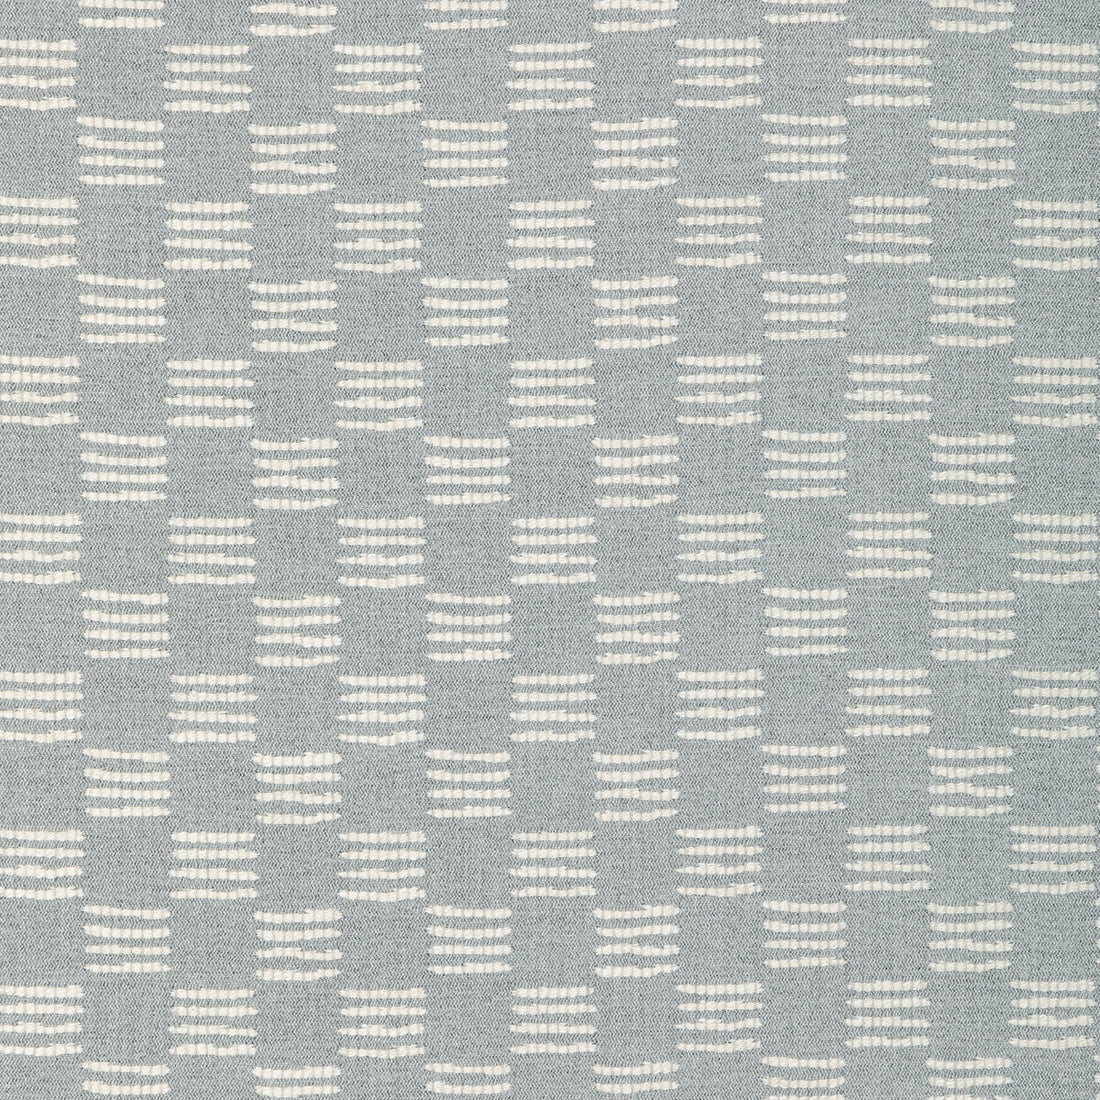 Stroll fabric in frost color - pattern GWF-3785.1311.0 - by Lee Jofa Modern in the Kelly Wearstler Oculum Indoor/Outdoor collection